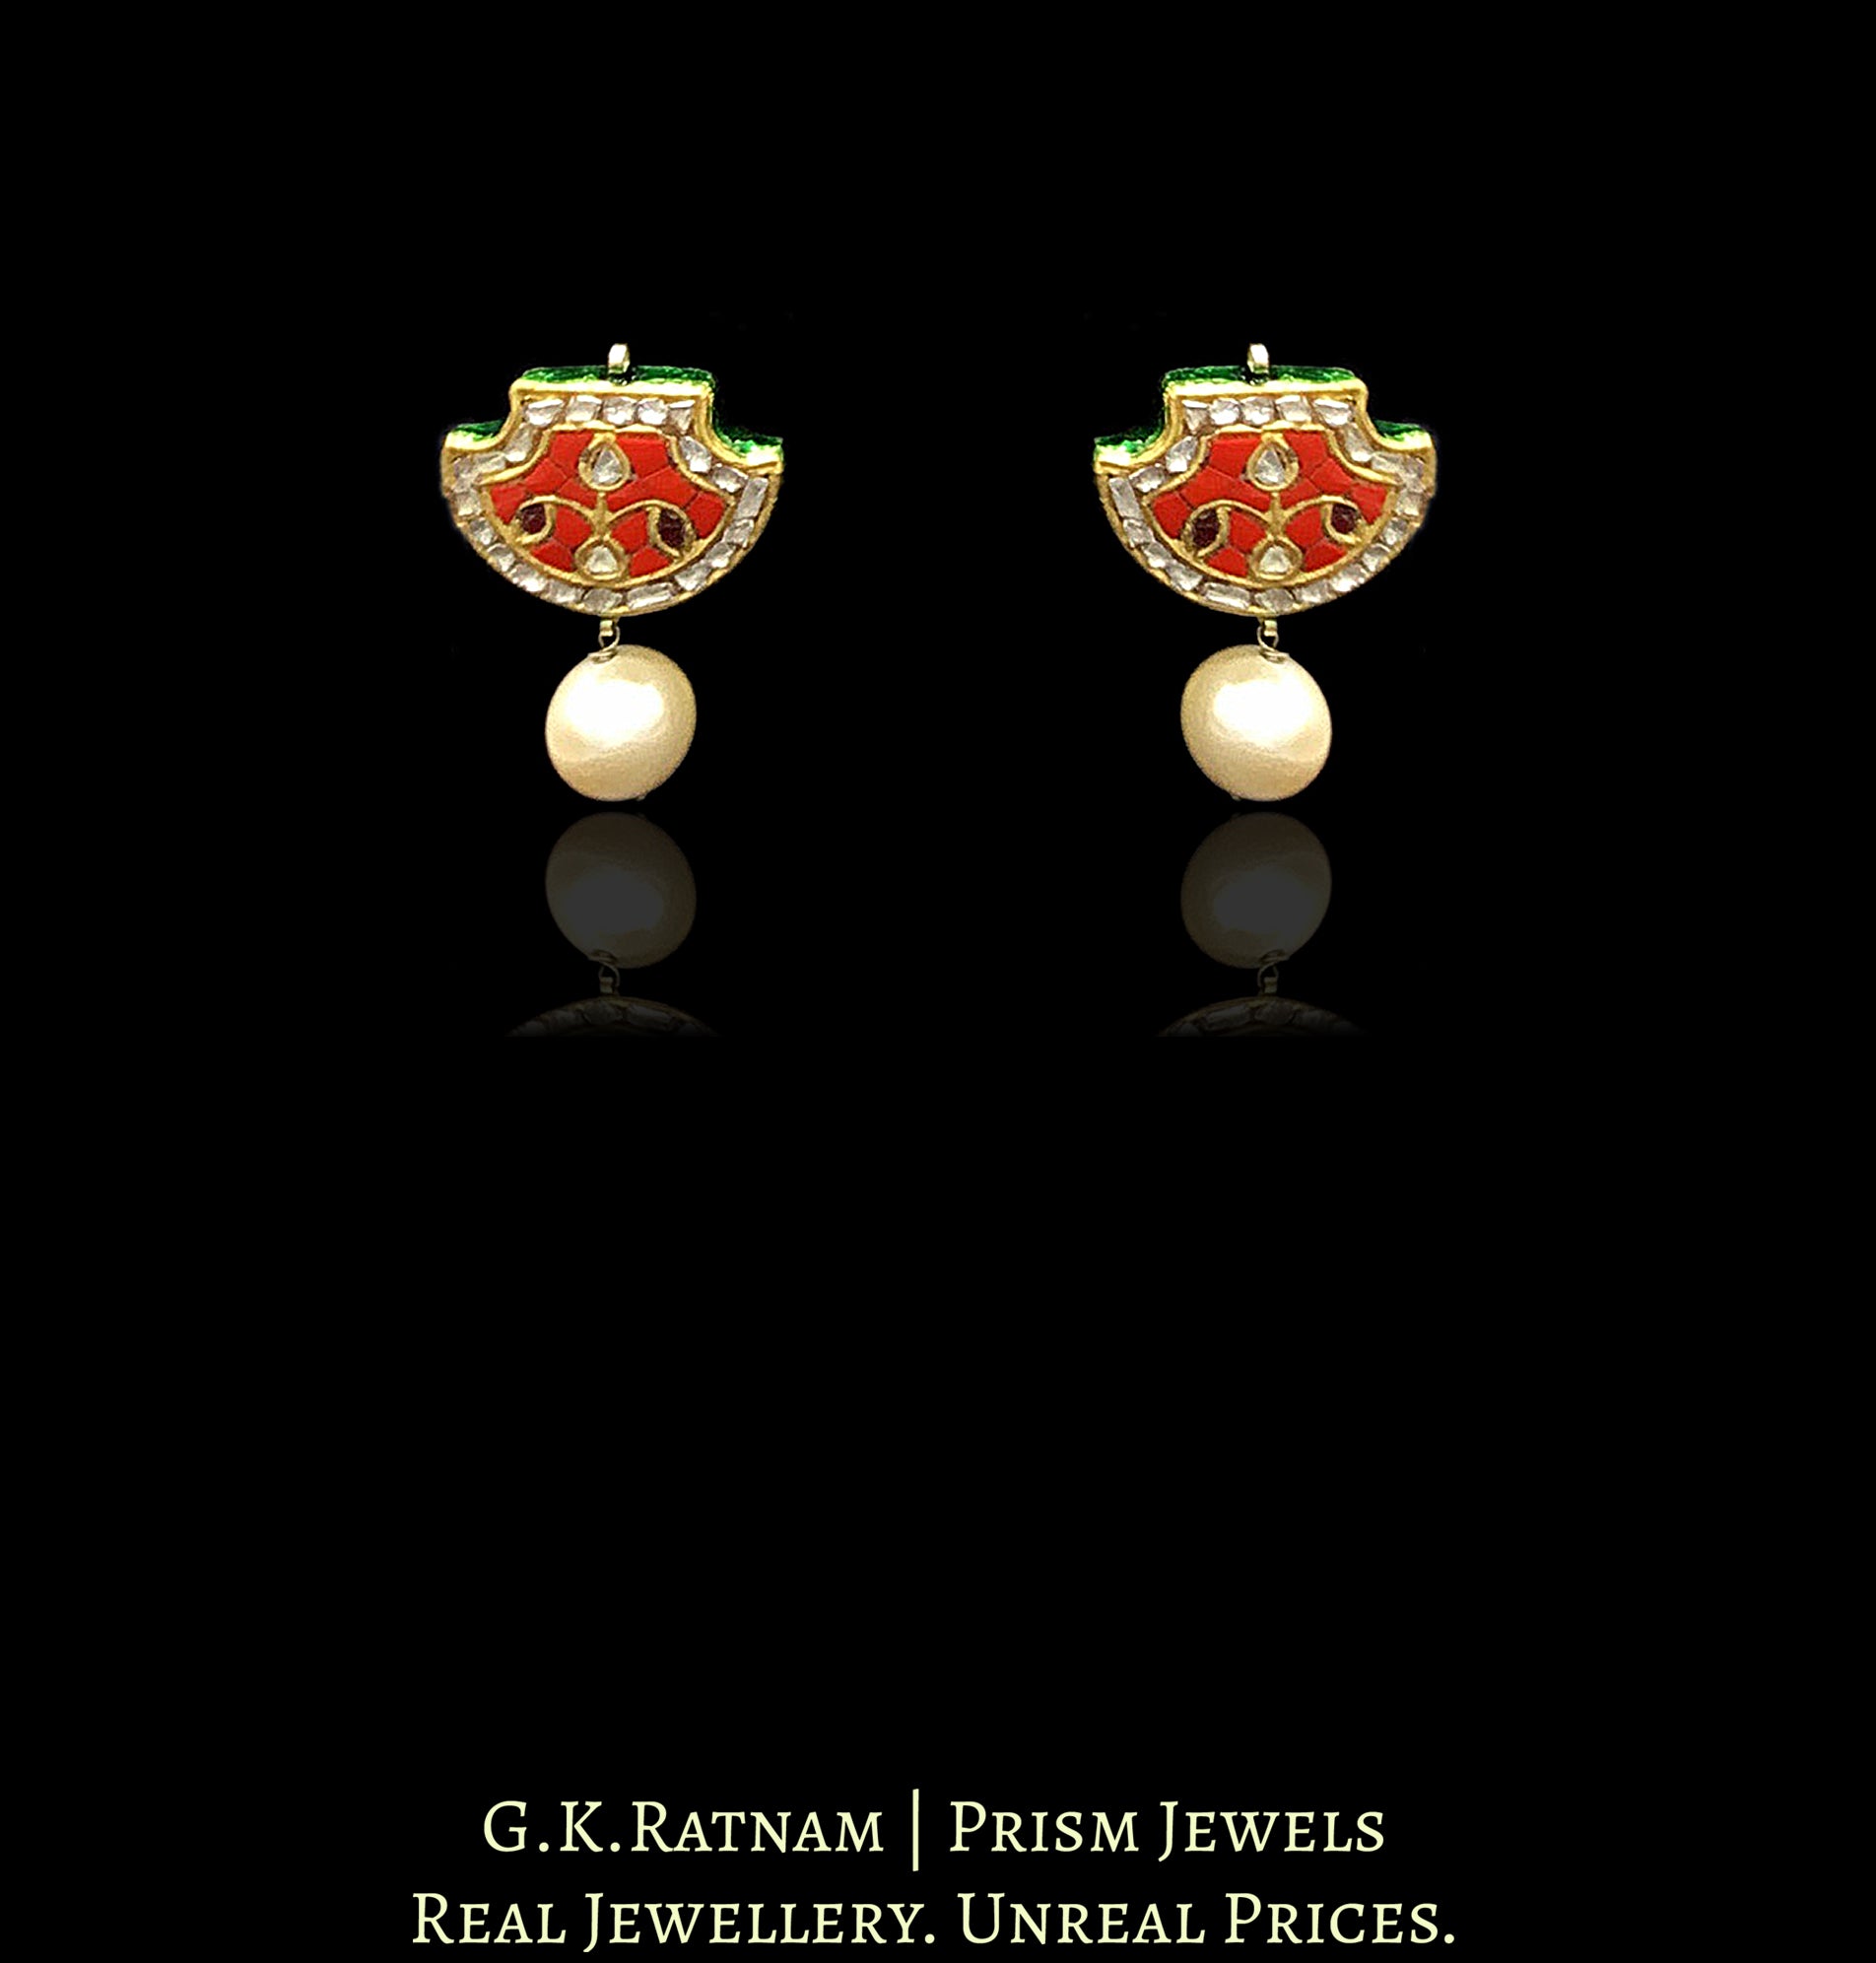 23k Gold and Diamond Polki Coral Pankhi (fan) Pendant Set strung with chid pearls - G. K. Ratnam